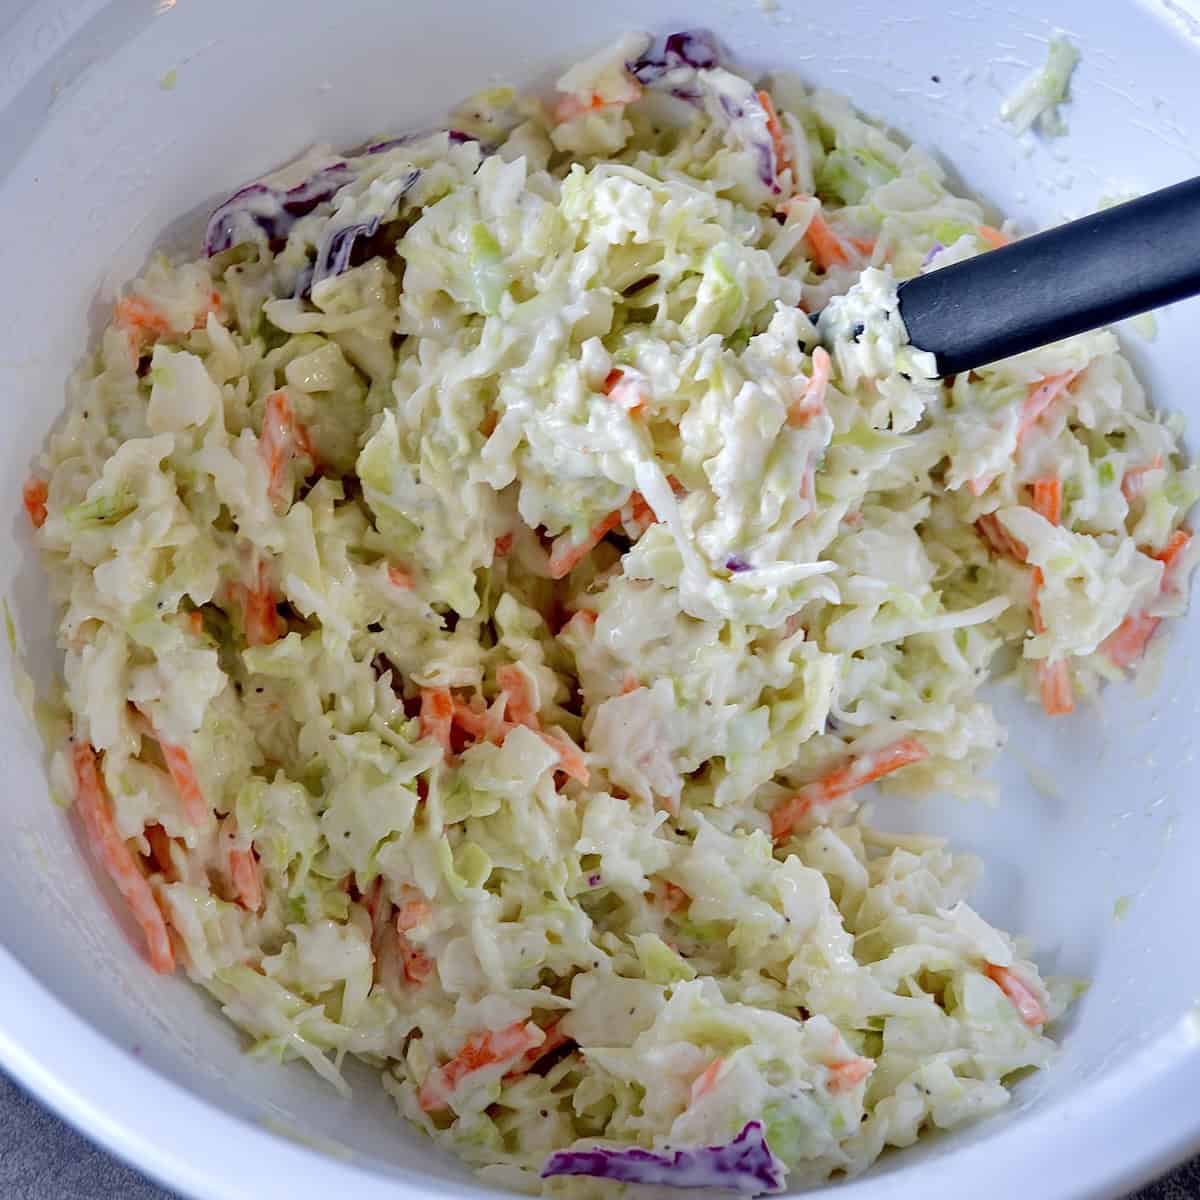 Mixing coleslaw dressing and cabbage